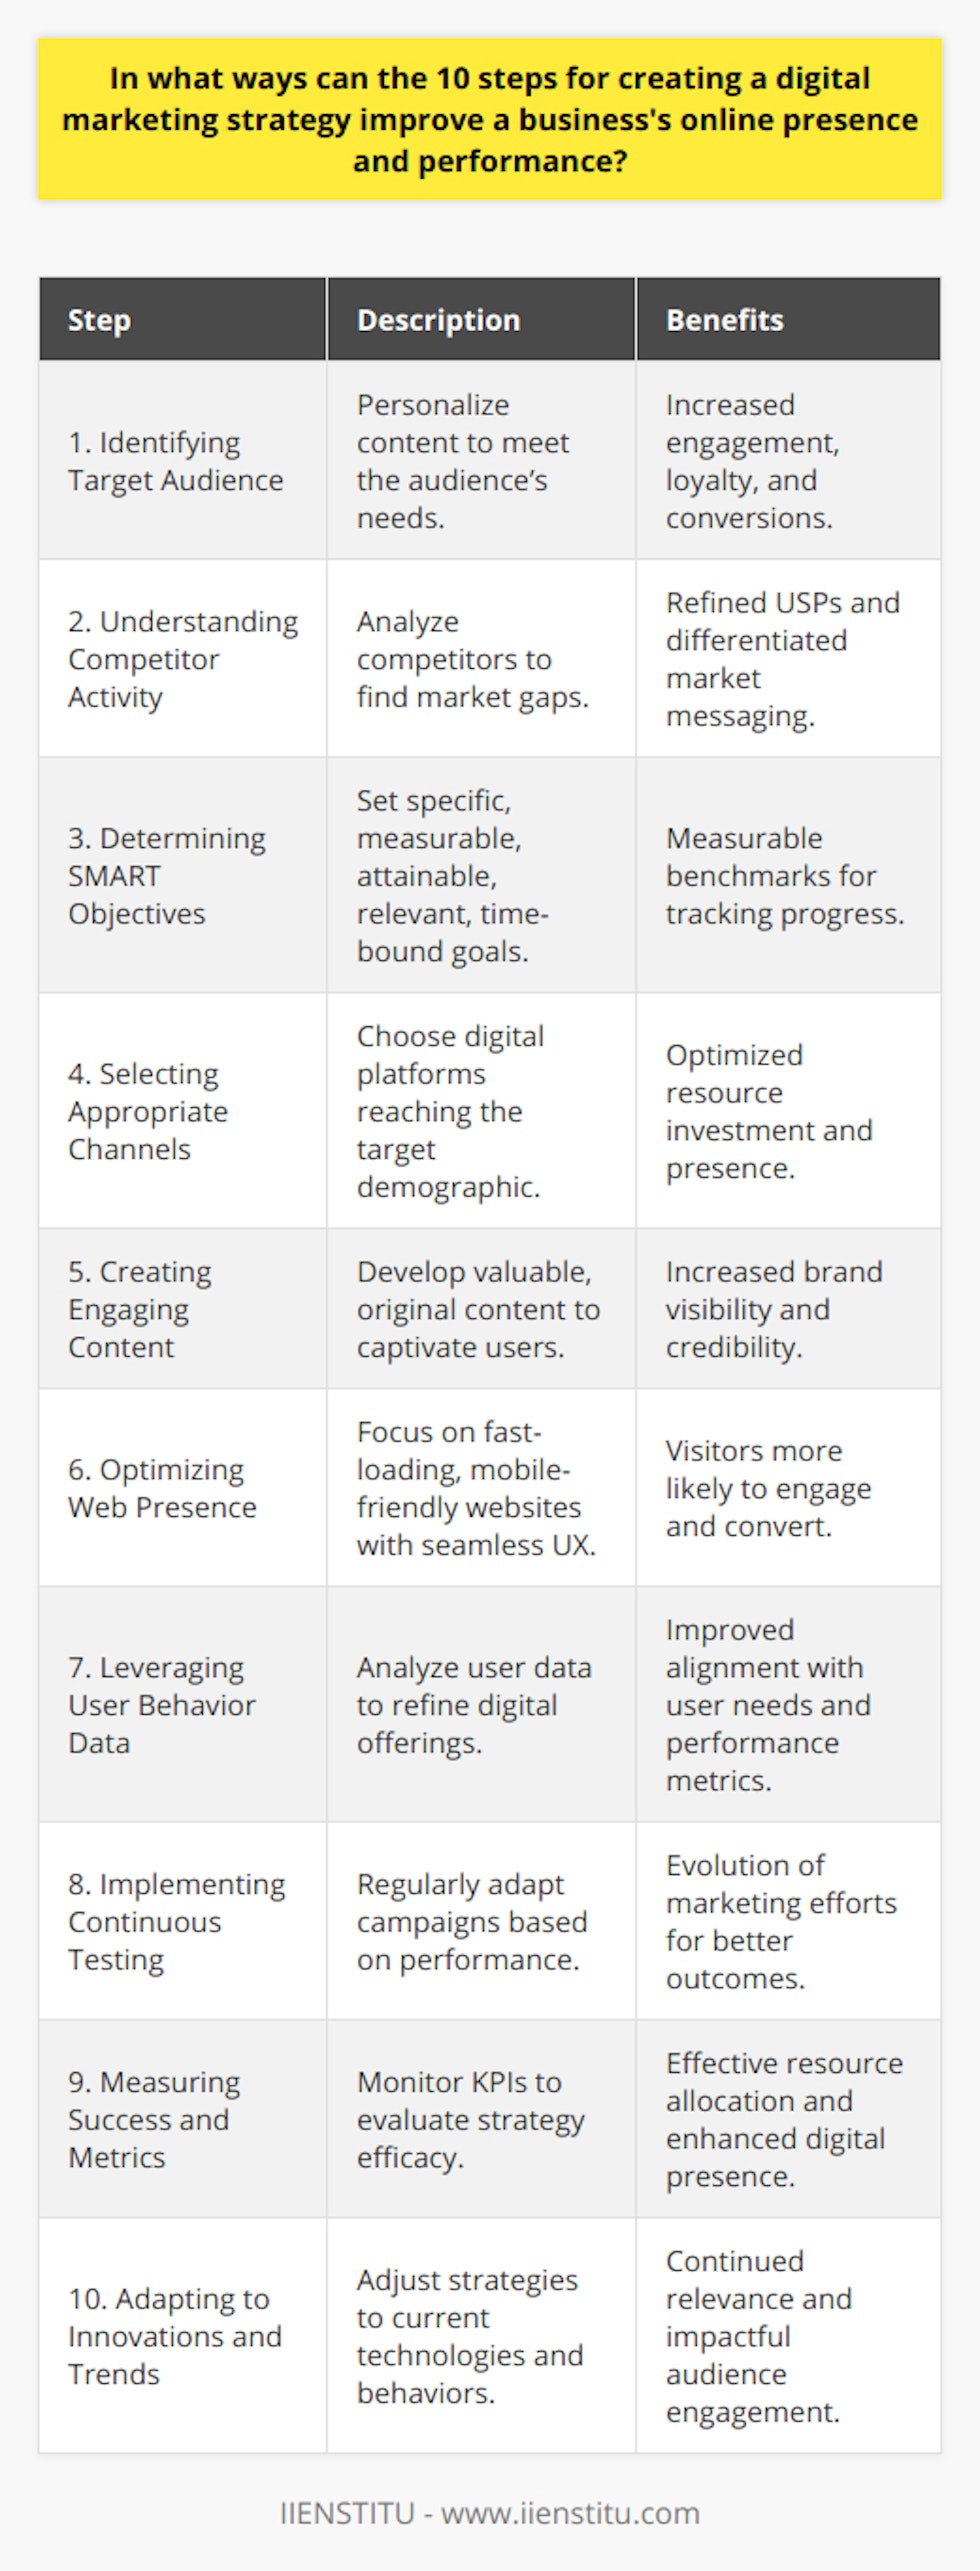 Creating a digital marketing strategy is an essential part of enhancing a business's online presence and performance. By systematically following specific steps, businesses can effectively reach their audience, engage users, and achieve their marketing goals. Here is how the 10 steps for creating a digital marketing strategy can result in these improvements:1. **Identifying Target Audience**: By understanding who the intended audience is, businesses can tailor their digital content and campaigns to meet the specific needs and preferences of that group. This personalization can lead to increased engagement, loyalty, and conversions, as customers are more likely to interact with content that resonates with them.2. **Understanding Competitor Activity**: Knowing what the competition is doing allows businesses to spot gaps in the market and opportunities to stand out. Analyzing competitors' strategies can help companies hone their unique selling propositions and craft messages that distinguish them from the crowd.3. **Determining SMART Objectives**: Setting clear, quantifiable goals guides the focus of digital marketing efforts and provides measurable benchmarks for success. Businesses can track their progress and pivot their strategies if needed, ensuring they are always moving towards their objectives.4. **Selecting Appropriate Channels**: Every digital marketing channel offers different benefits and reaches various audiences. By carefully choosing the channels that most effectively reach their target demographic, businesses can optimize their investments and enhance their online presence where it matters most.5. **Creating Engaging Content**: Content is king in the digital world. By developing original, valuable, and captivating content, businesses can attract and retain users' attention. Content that provides real value encourages sharing and conversation, which can elevate a brand's visibility and credibility online.6. **Optimizing Web Presence**: A well-designed, fast-loading, and mobile-friendly website is central to any digital strategy. By focusing on a seamless user experience, businesses ensure that visitors are more likely to stay on the site, engage with the content, and complete desired actions, such as making a purchase or signing up for a newsletter.7. **Leveraging User Behavior Data**: Access to user data allows businesses to refine their strategies based on actual user interactions. By understanding how users behave on their digital platforms, companies can tailor their offerings to better match the users' needs, leading to improved performance metrics.8. **Implementing Continuous Testing**: Digital landscapes are dynamic, and so should be the marketing strategies. Regular testing and adaptation of campaigns allow businesses to discover what works best and to continue evolving their efforts for improved outcomes.9. **Measuring Success and Metrics**: By closely monitoring various metrics, companies can evaluate the efficiency of their digital strategies. Analysis of key performance indicators (KPIs) enables businesses to allocate resources more effectively and to further enhance their digital presence.10. **Adapting to Innovations and Trends**: The digital world is ever-changing, and staying current on trends is non-negotiable. By embracing new technologies and adjusting to emerging online behaviors, businesses can proactively engage with their audience in relevant and impactful ways.By integrating these ten steps into their digital marketing strategy, businesses can create a comprehensive approach to online engagement and growth. Each step builds on the preceding one, ensuring that the digital presence a business builds is not only expansive but also responsive to the continually evolving digital landscape. With a strong digital presence, businesses are better poised to achieve their online objectives and maintain a competitive edge.